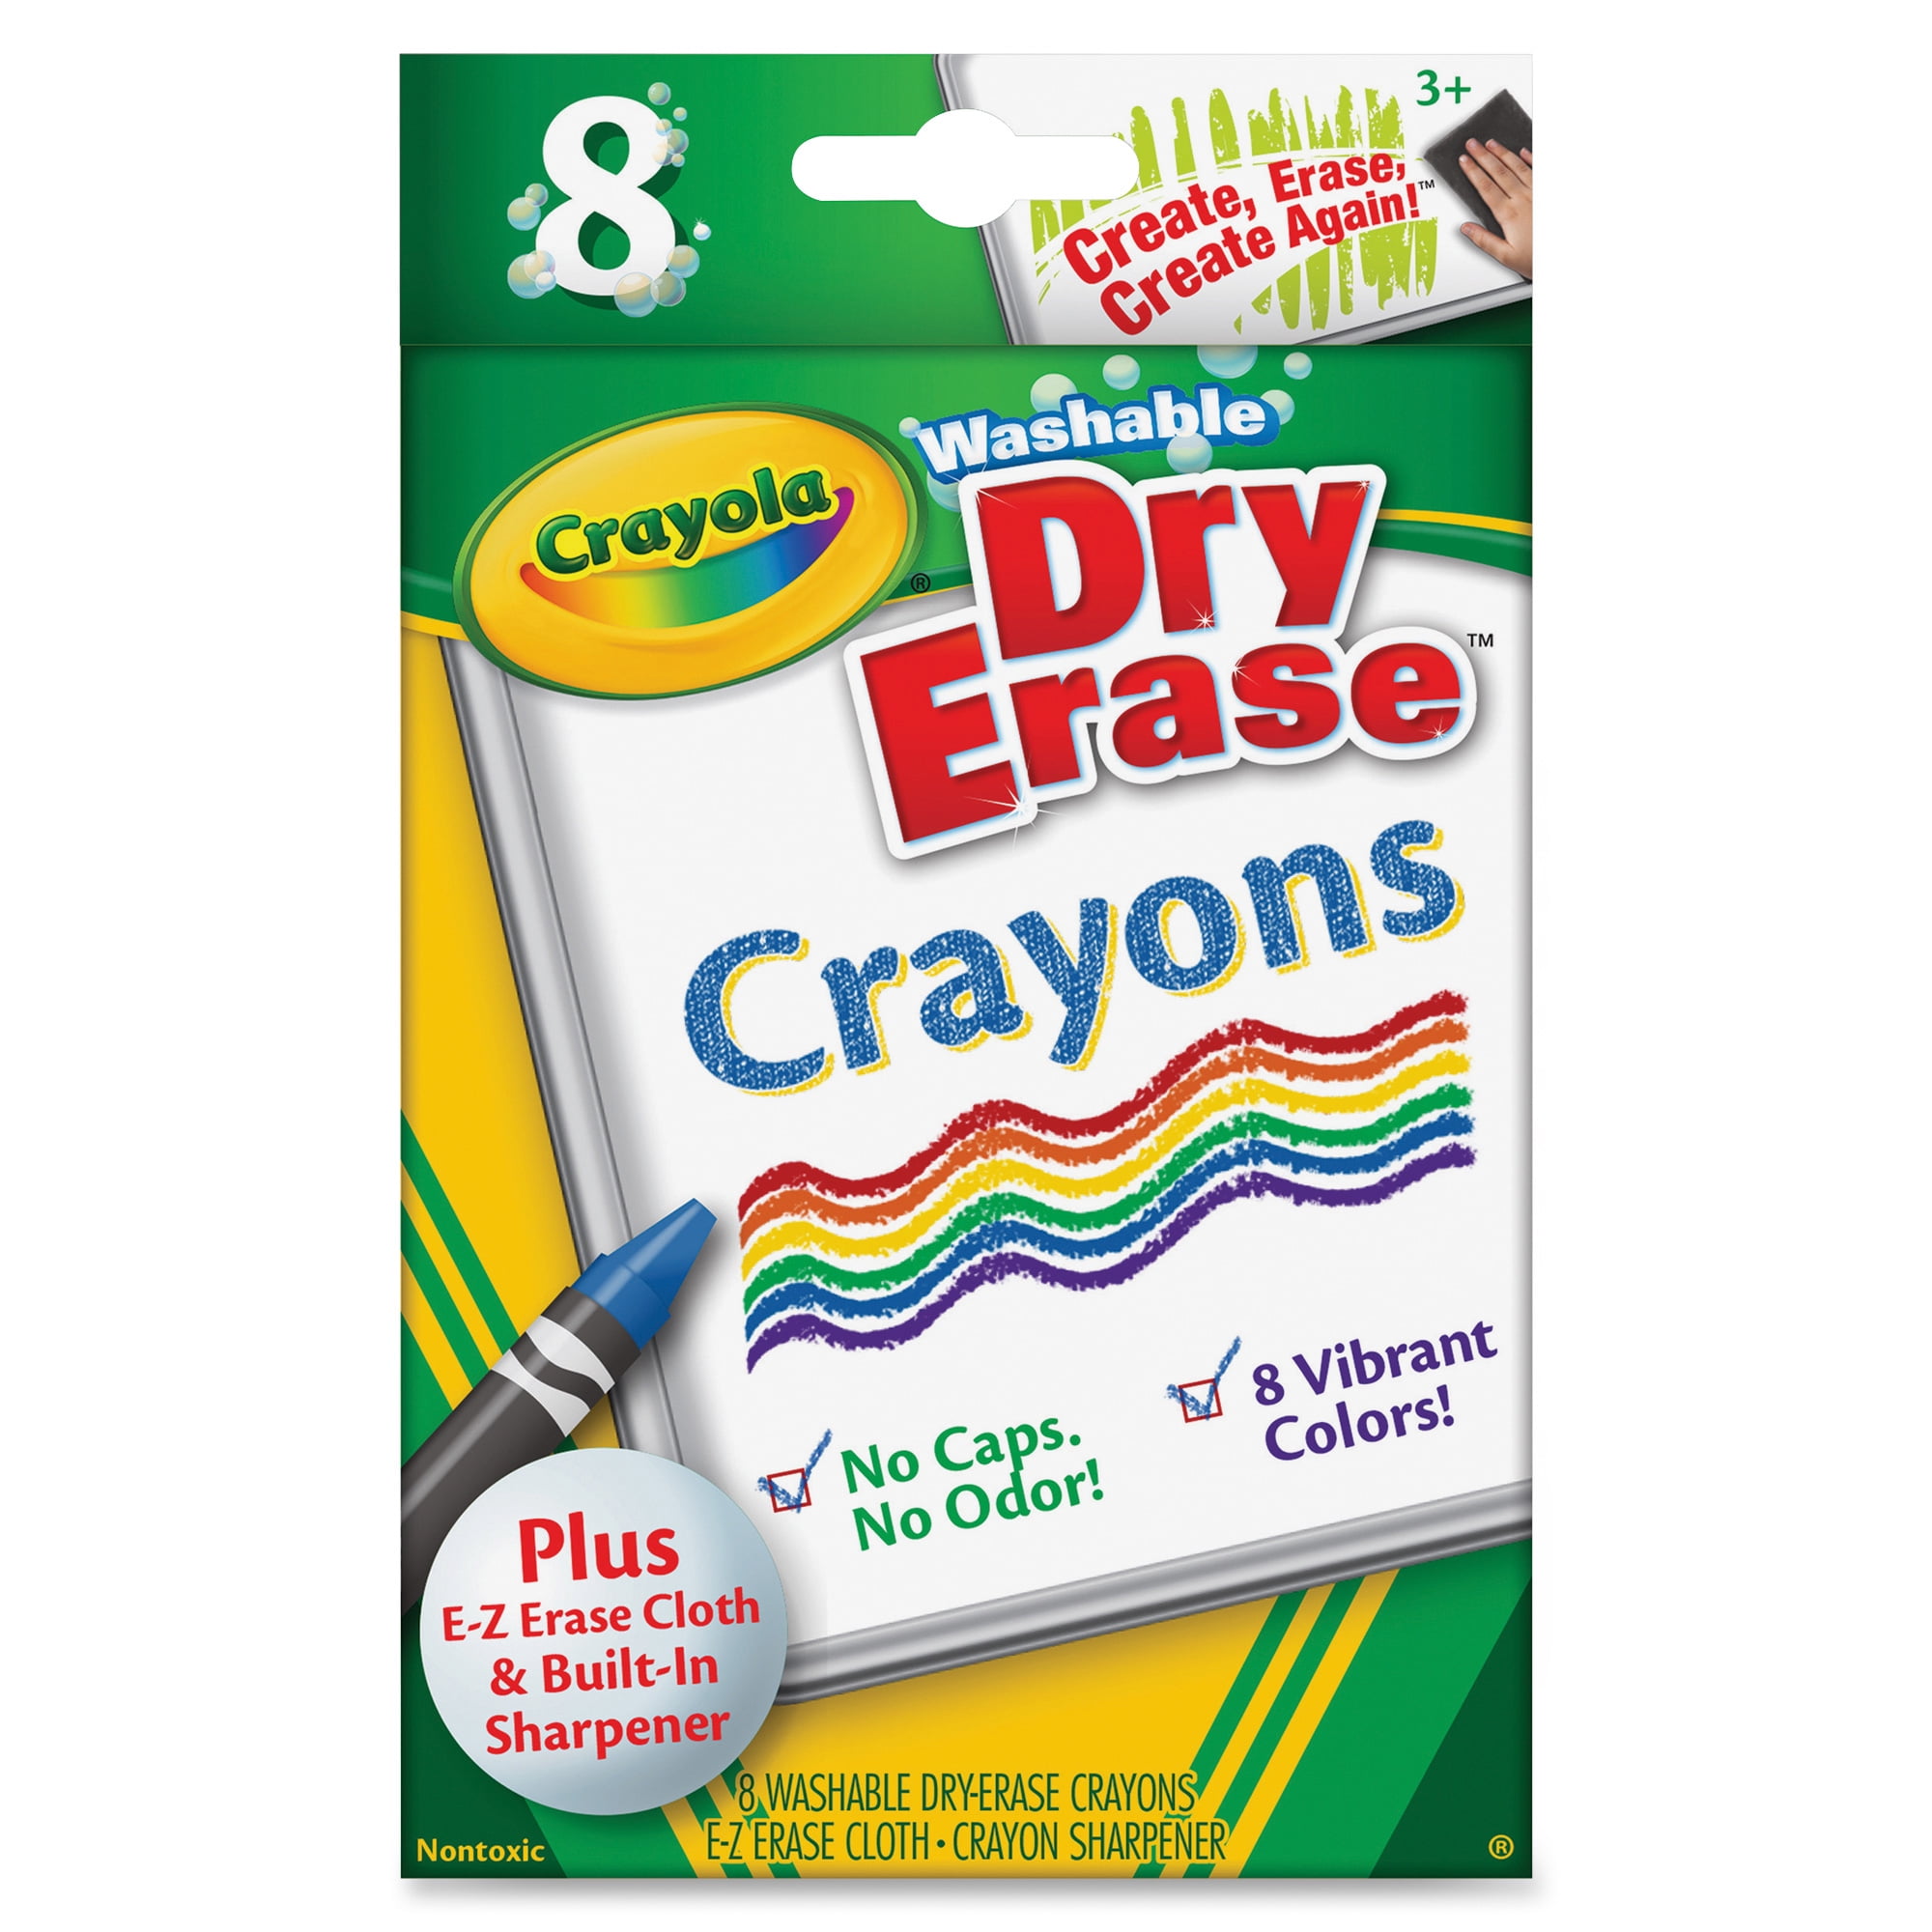 Dry Erasable Crayon for Kids Can Be Draw on Glass, Window Easily Washable  Baby Bath Crayons Factory - China Crayons, Wax Crayon